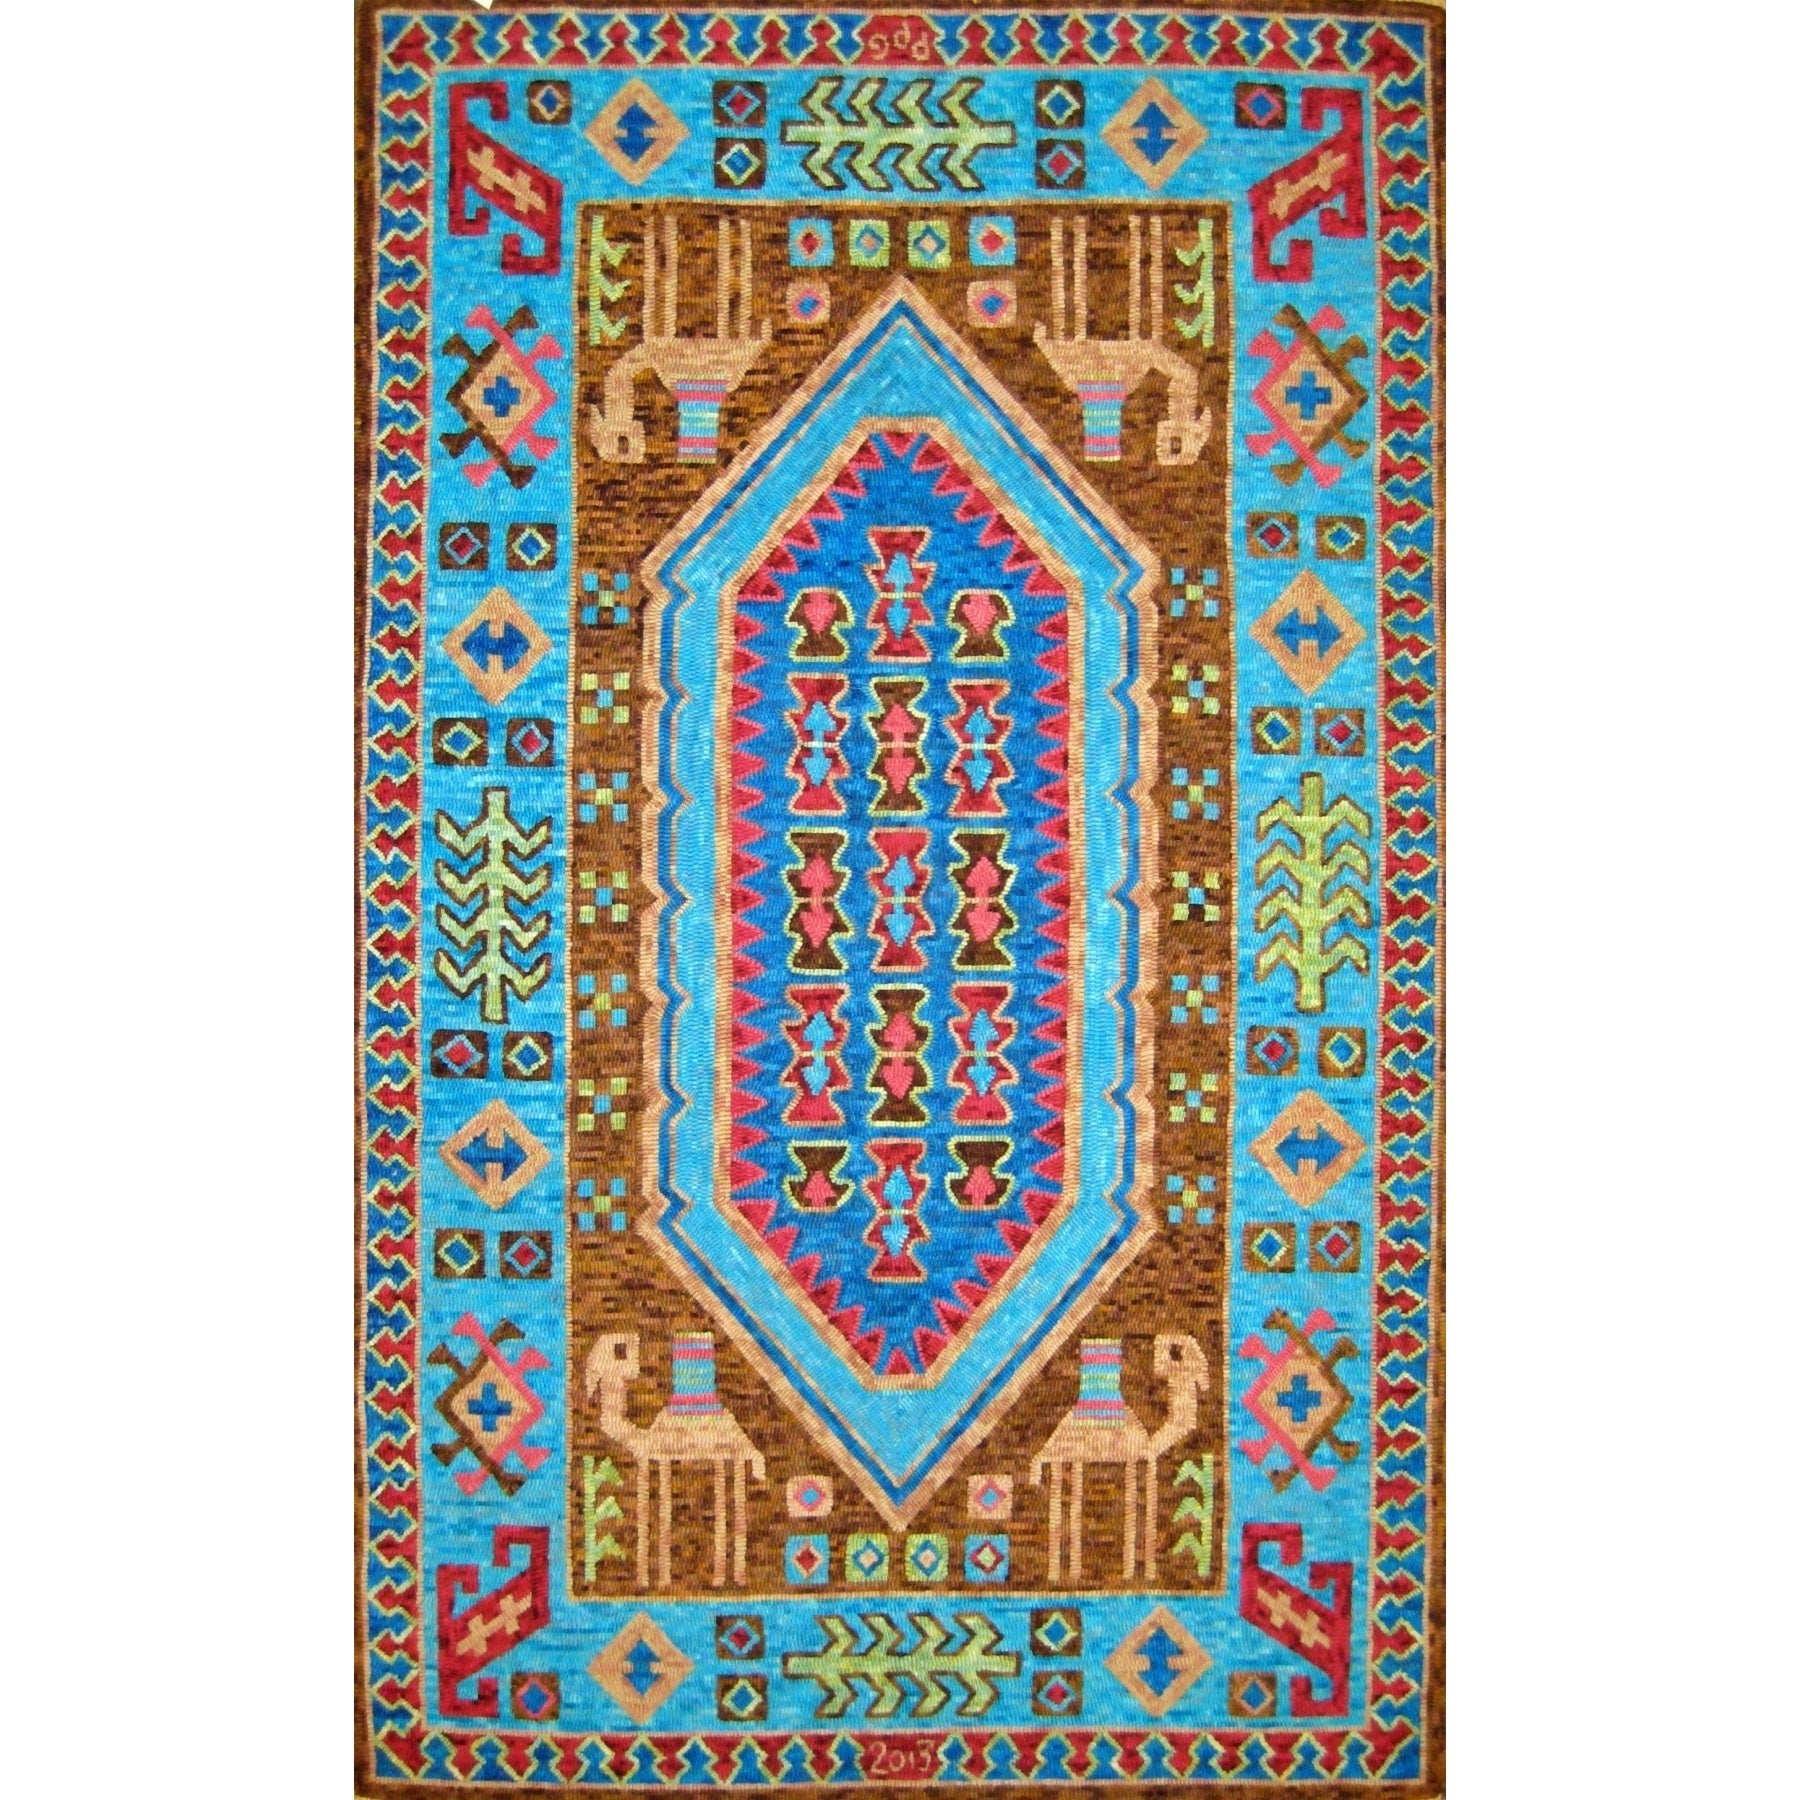 Chahar Mahal, rug hooked by Patty Piek-Groth